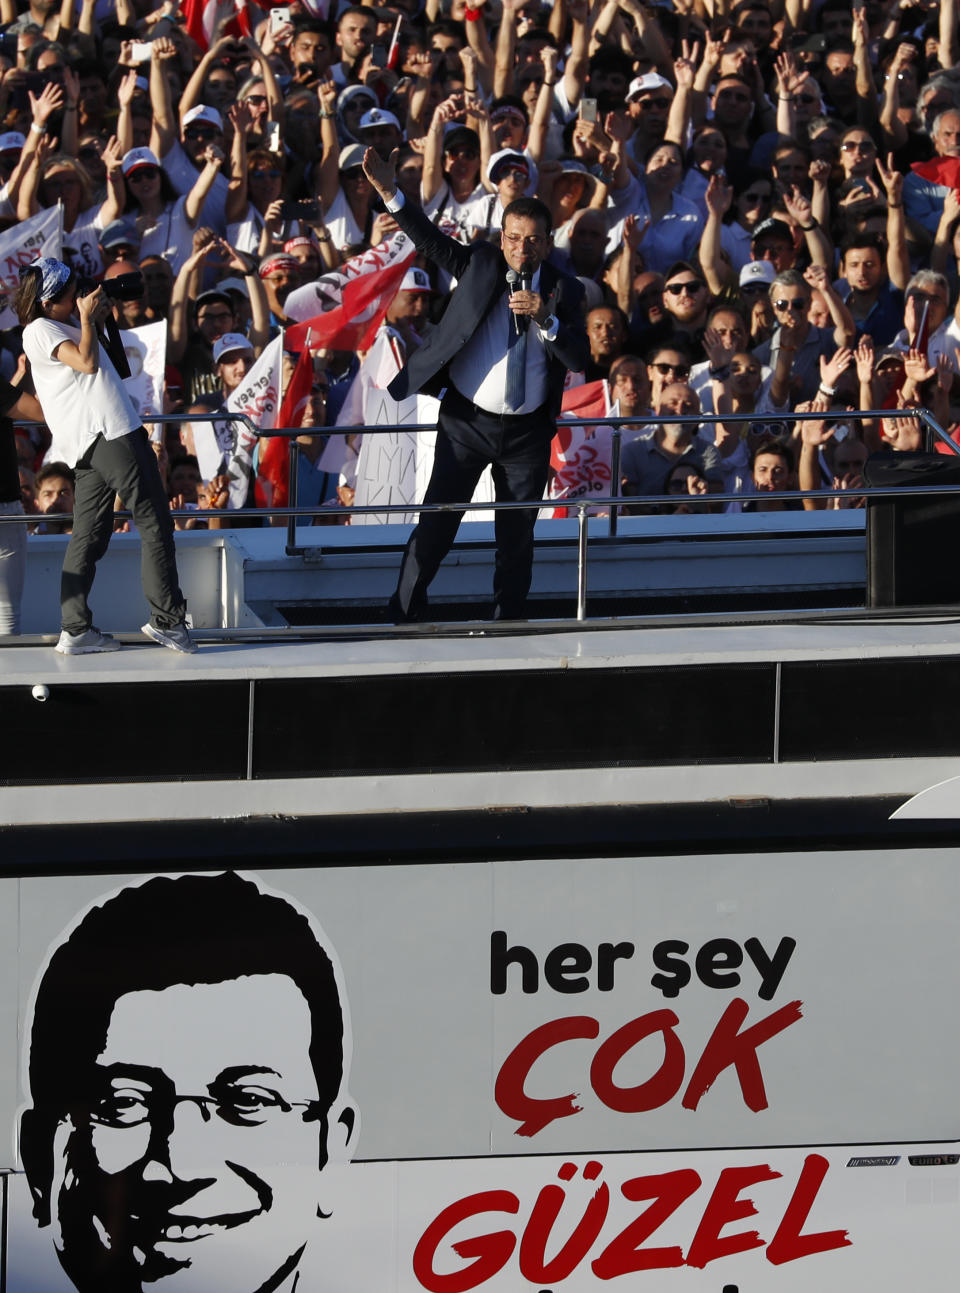 Thousands of supporters surround a bus from where Ekrem Imamoglu, centre, the new Mayor of Istanbul from Turkey's main opposition opposition Republican People's Party (CHP) makes a speech after he took over office, in Istanbul, Thursday, June 27, 2019. The sign on the bus, partially reads in Turkish: 'Everything will be great,' which was Imamoglu's main election slogan. Imamoglu is formally taking office as mayor of Istanbul four days after he won a repeat election in Turkey's largest city and commercial hub. (AP Photo/Lefteris Pitarakis)